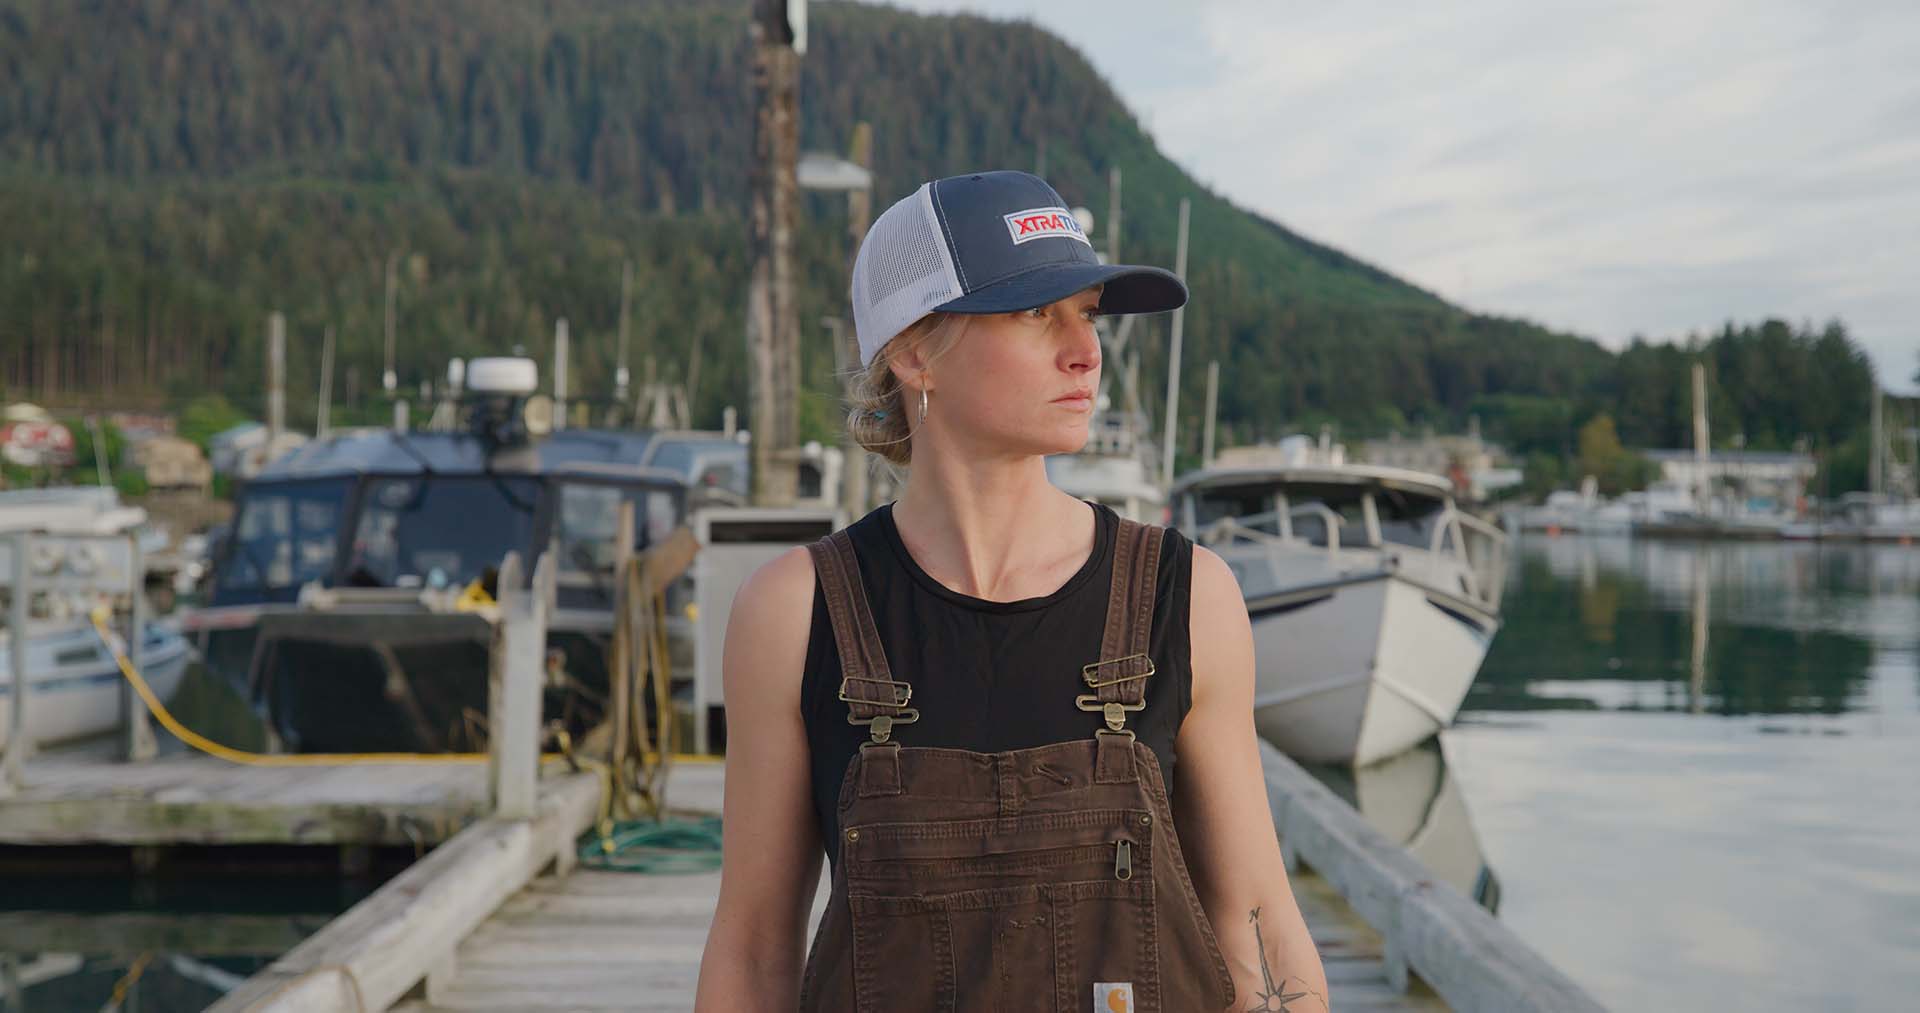 Mckenna Peterson, wearing a cap and brown overalls, gazing on a water body.